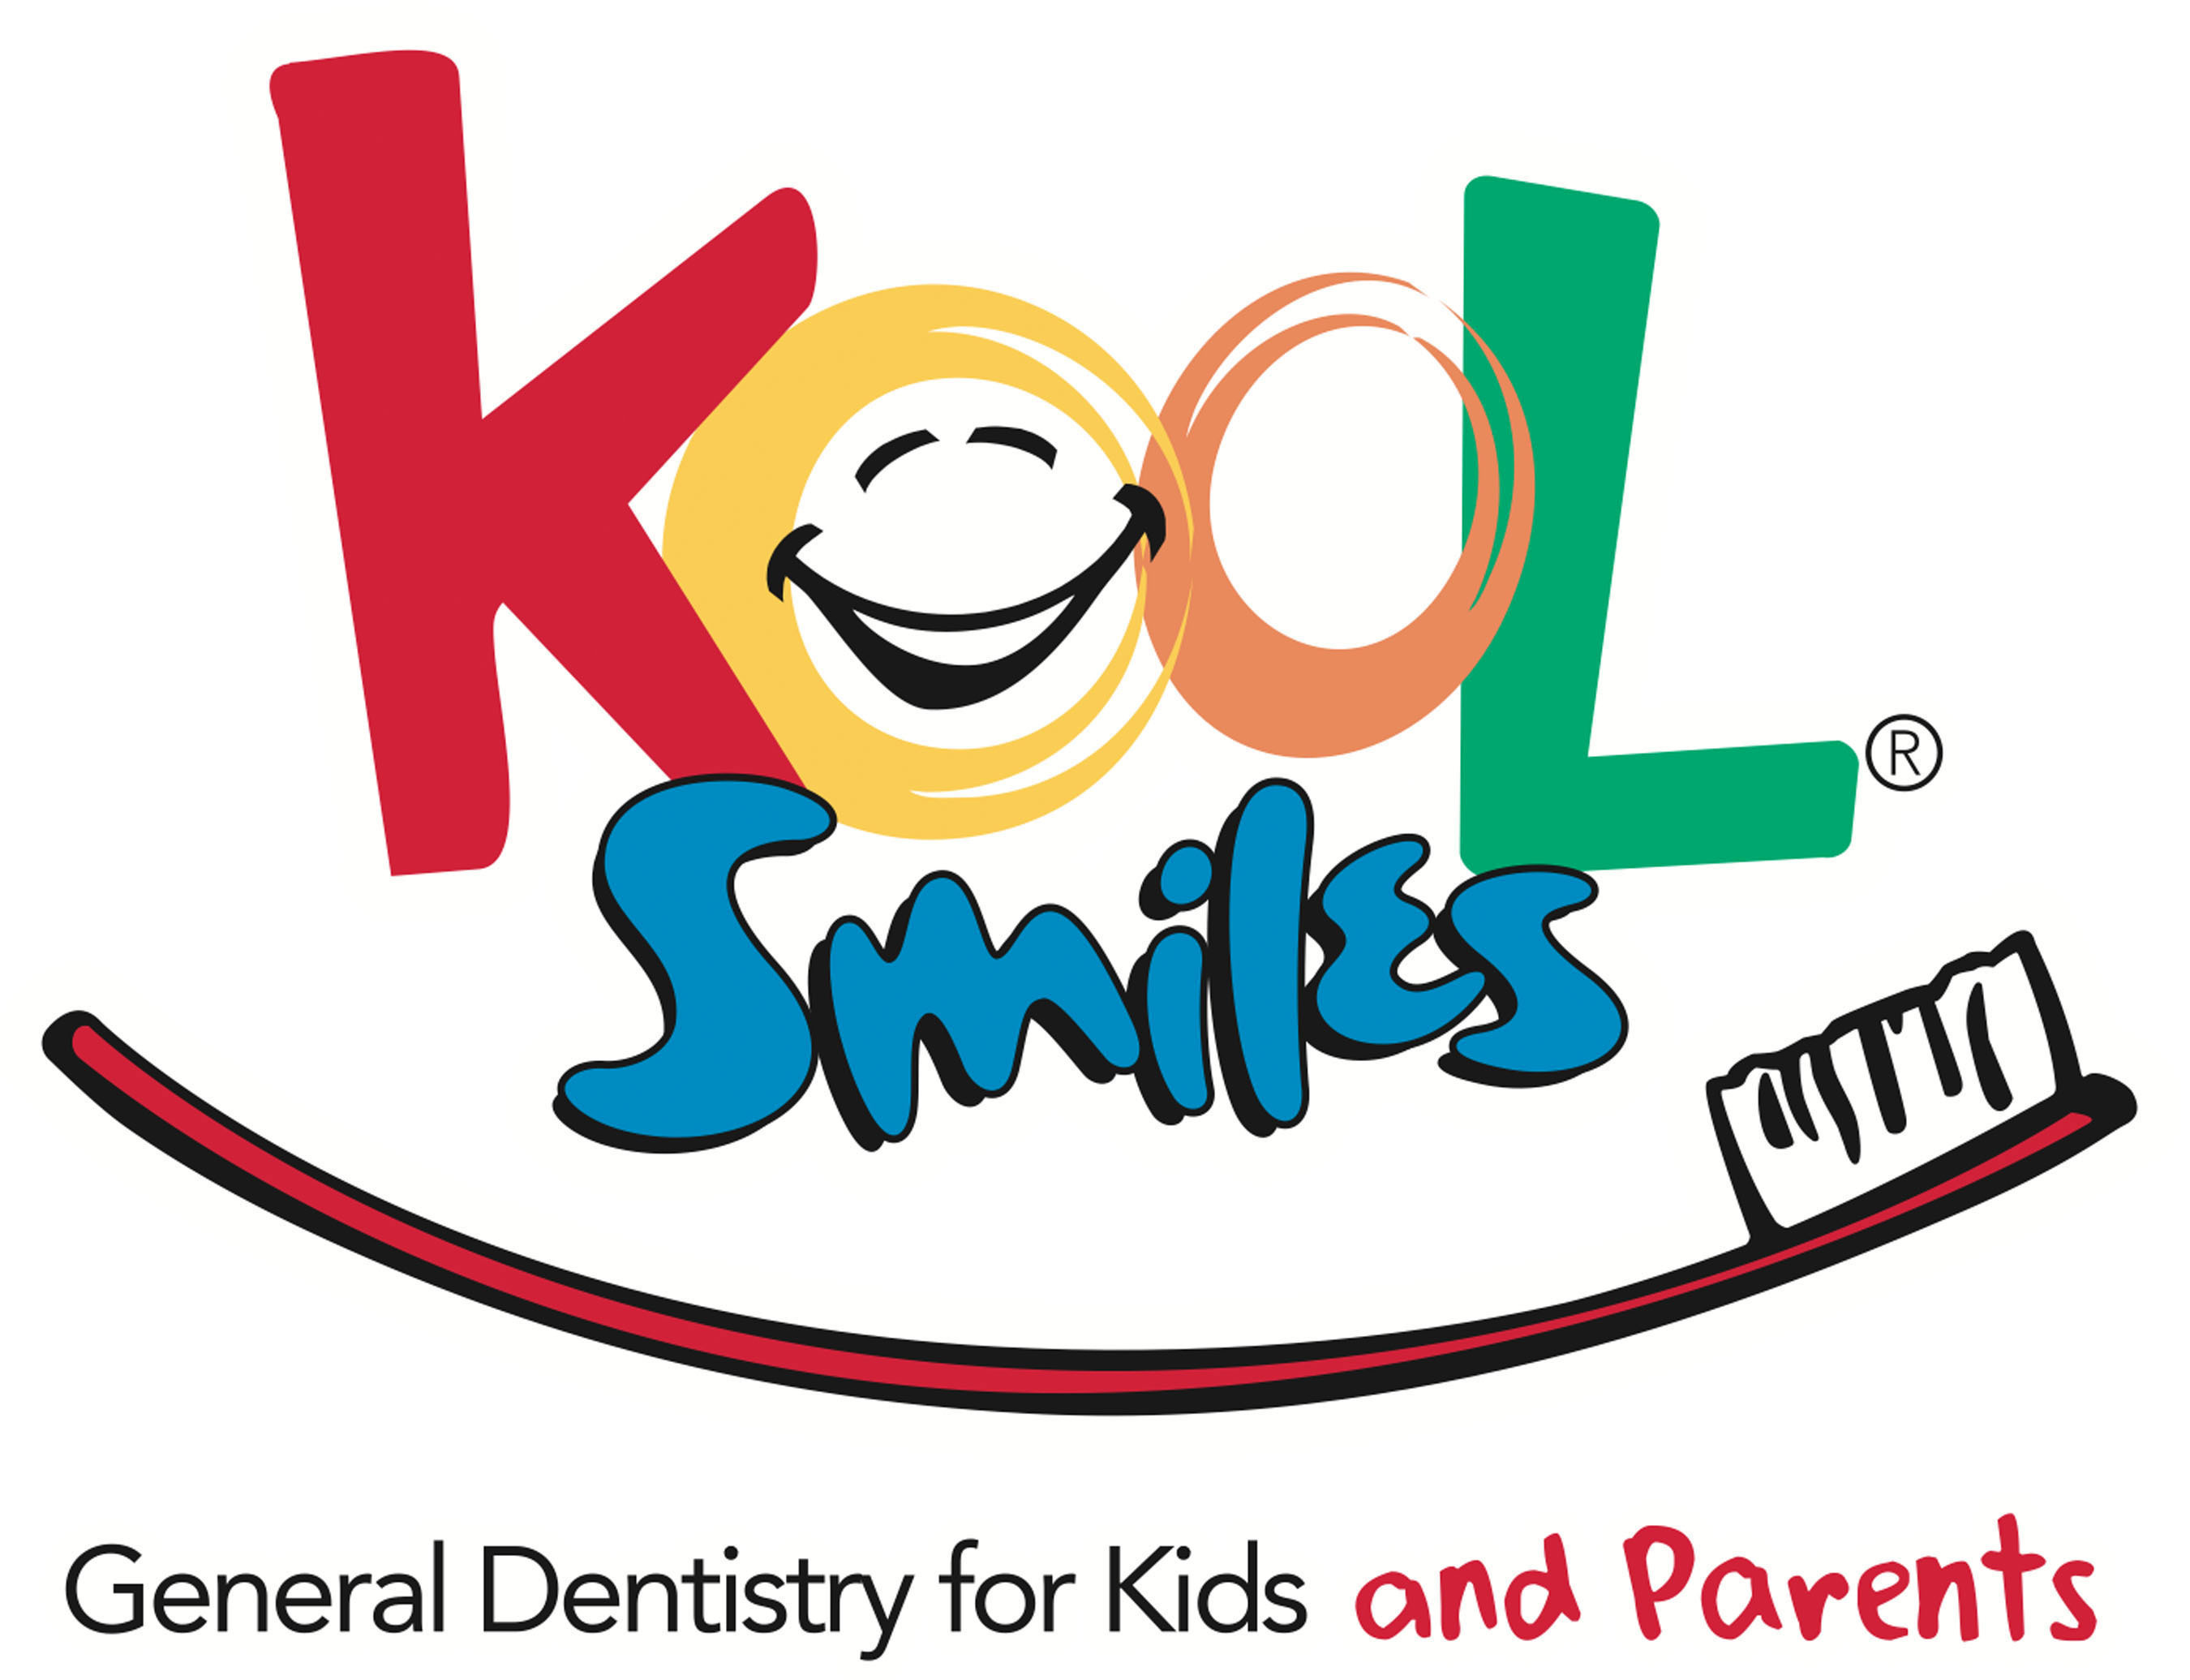 Kool Smiles is a general dentist for kids and their family